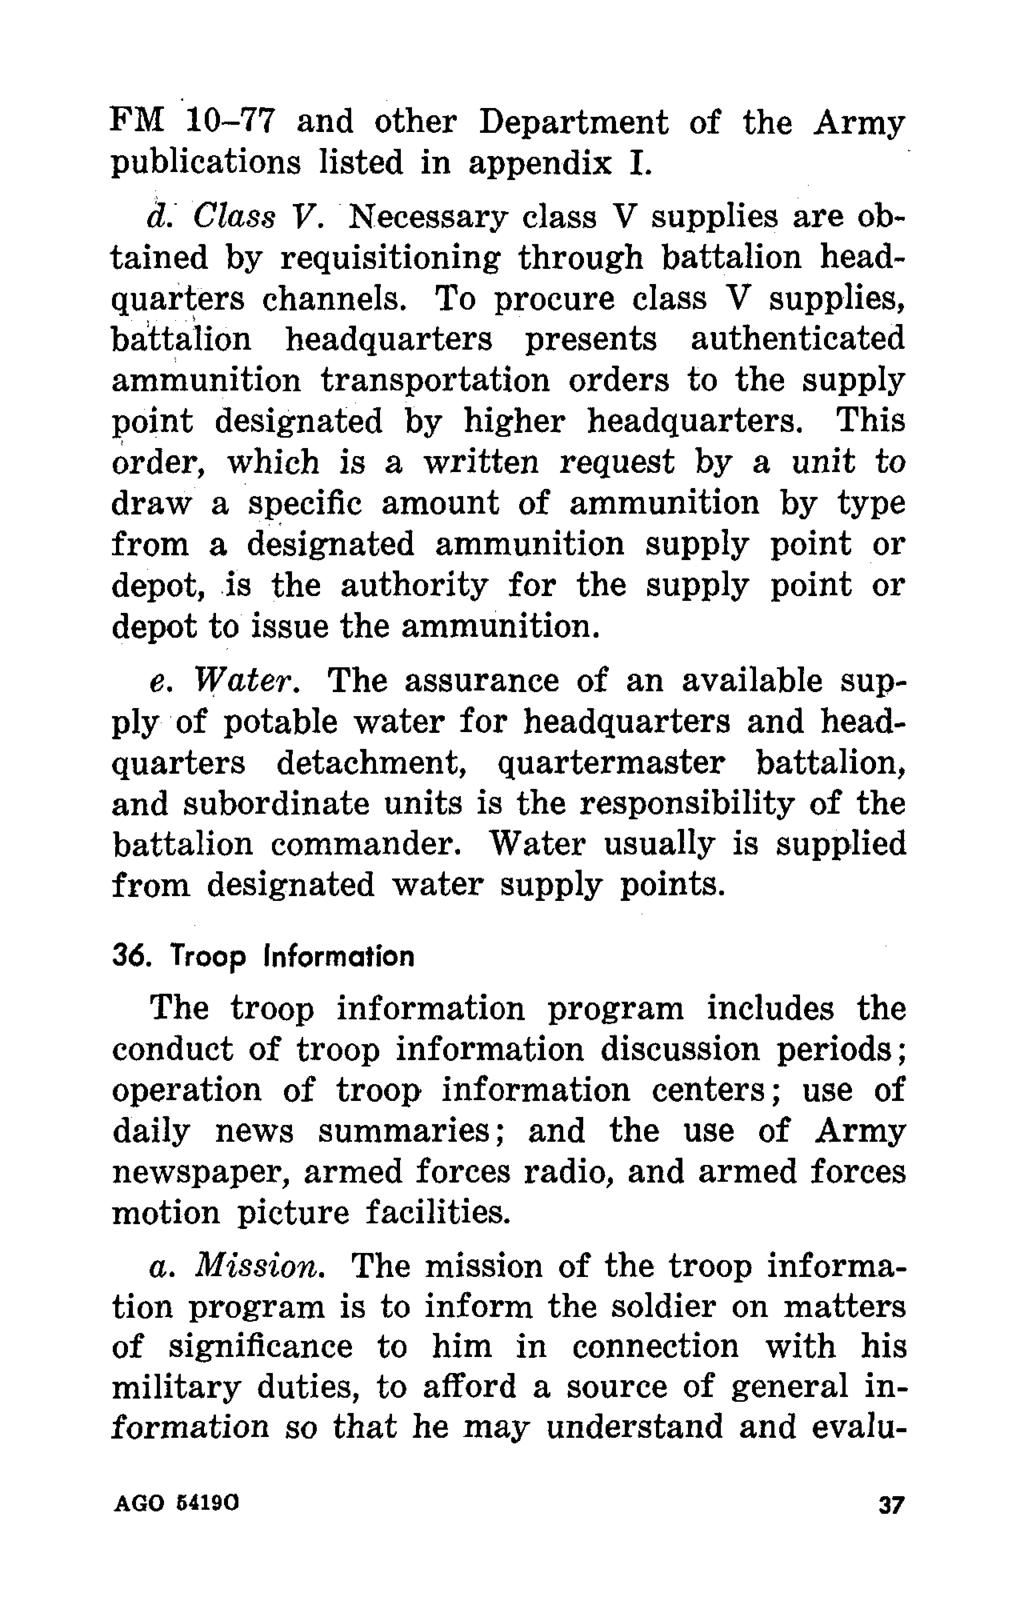 FM 10-77 and other Department of the Army publications listed in appendix I. d. Class V. Necessary class V supplies are obtained by requisitioning through battalion headquarters channels.